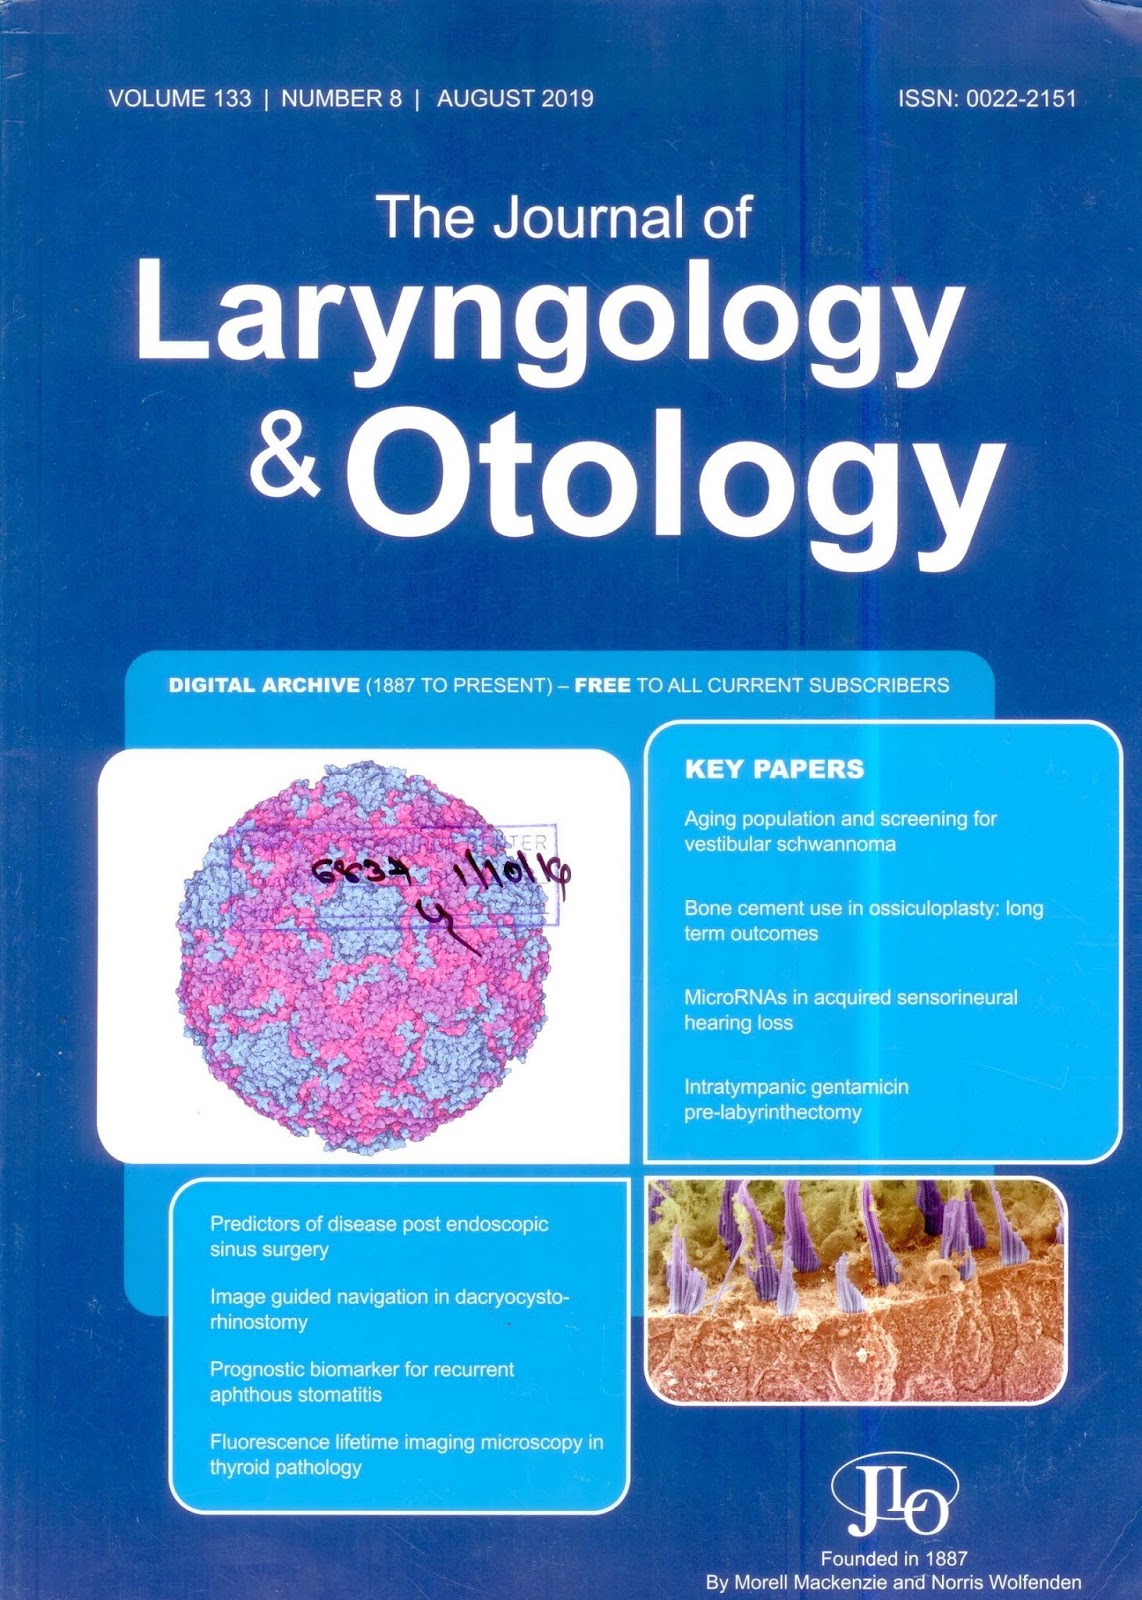 https://www.cambridge.org/core/journals/journal-of-laryngology-and-otology/issue/AE68D1DF1073C964EB5C27443B19665C